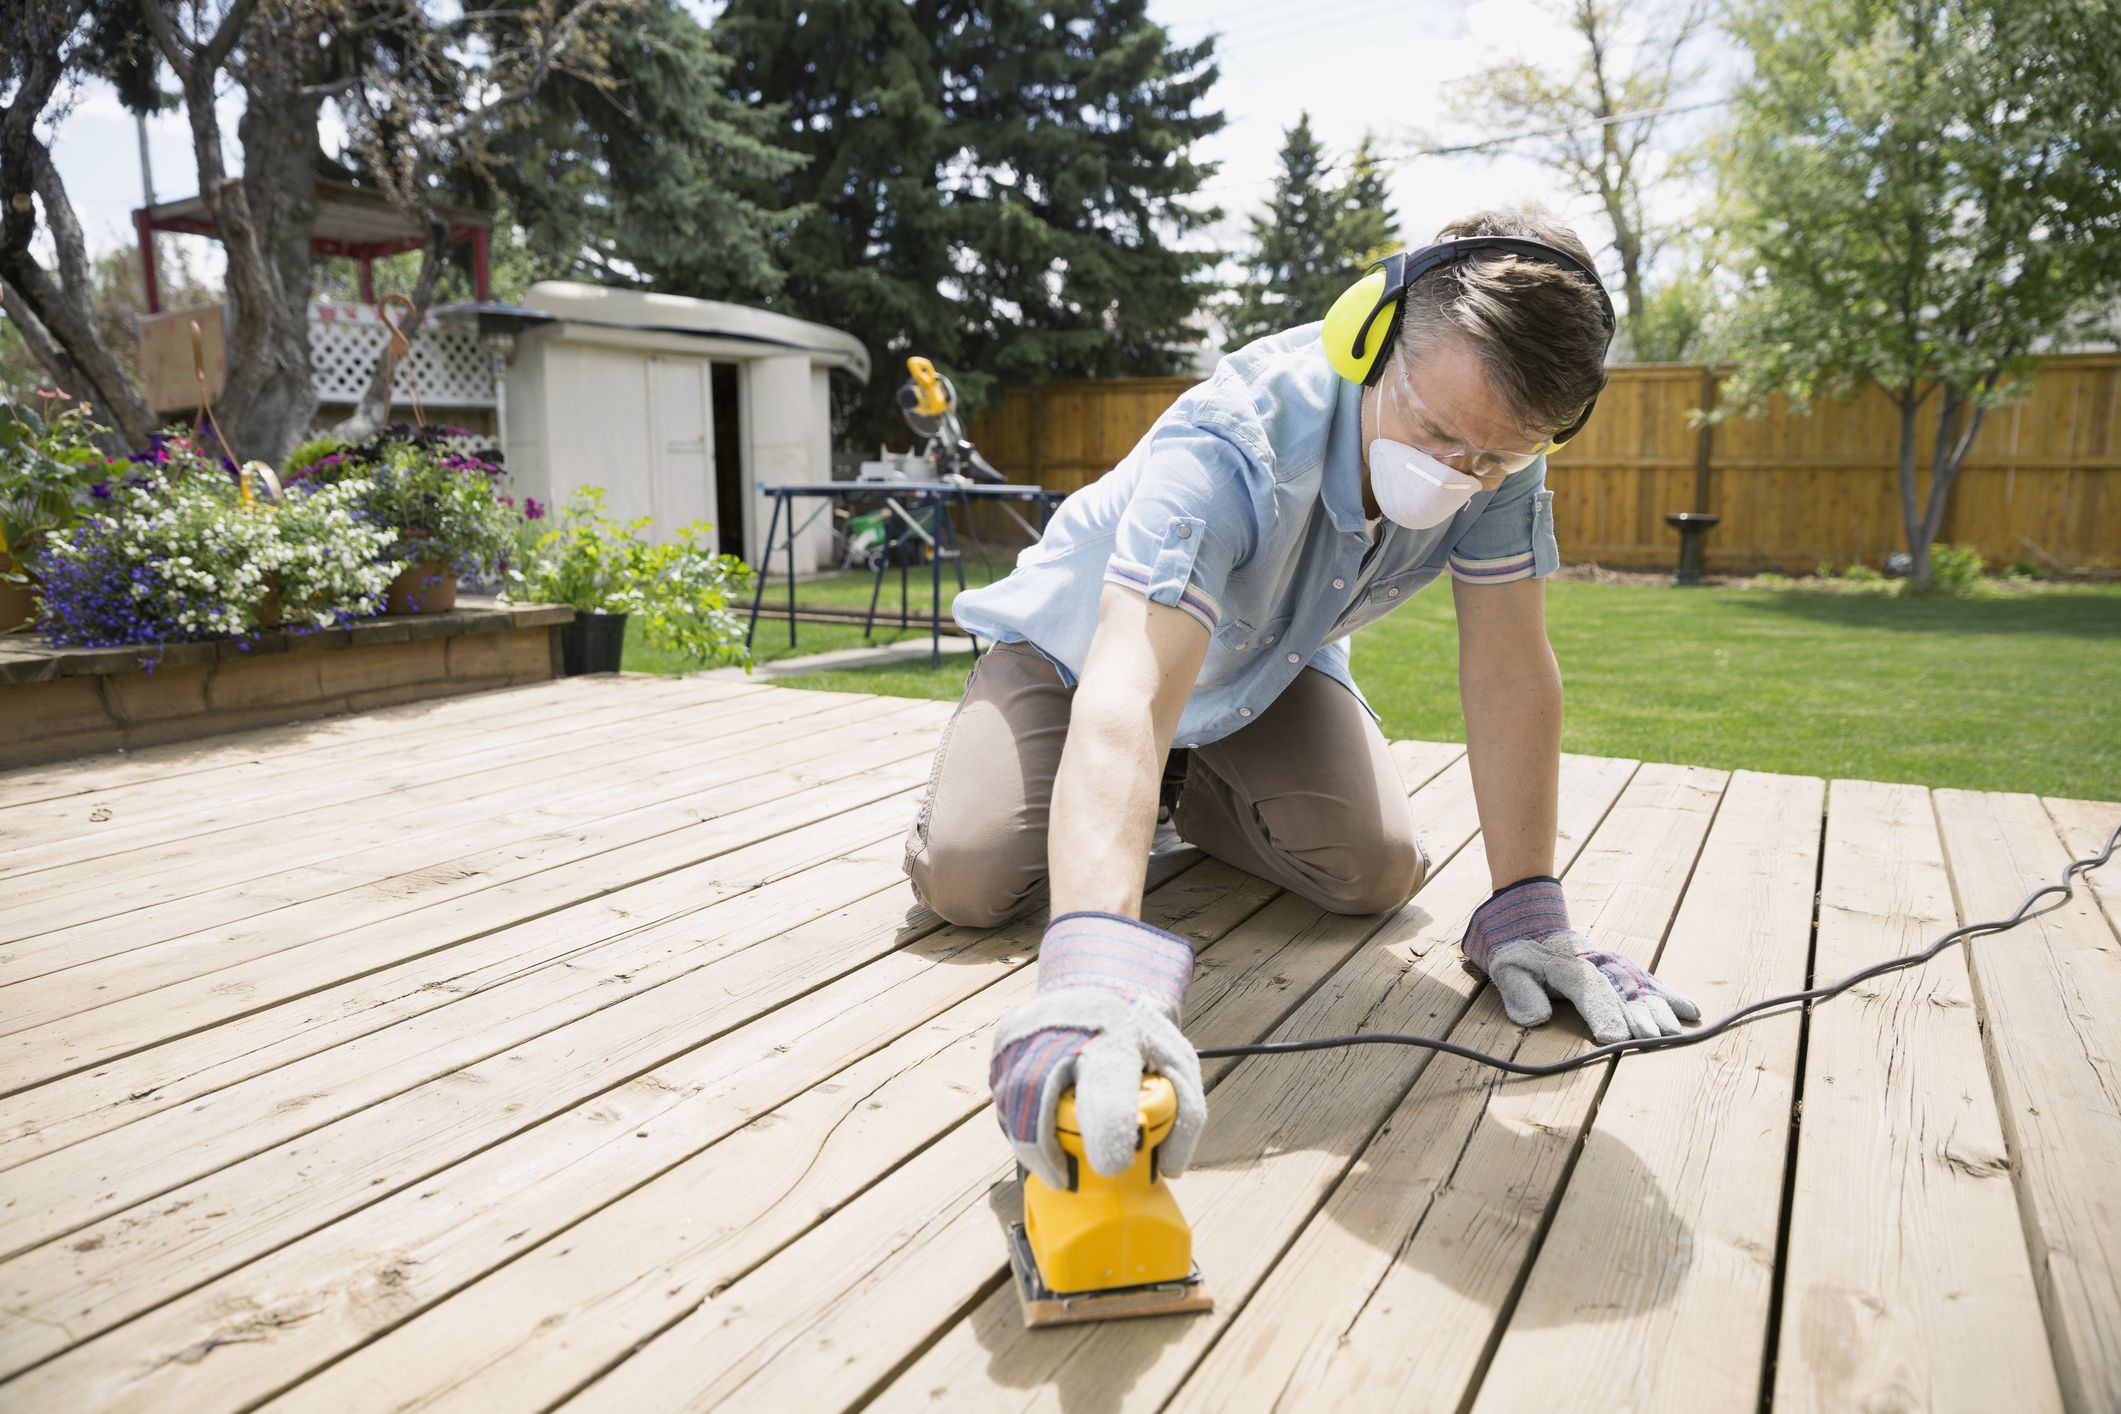 Cleaning and Brightening a Wood Deck With Oxygen Cleaner